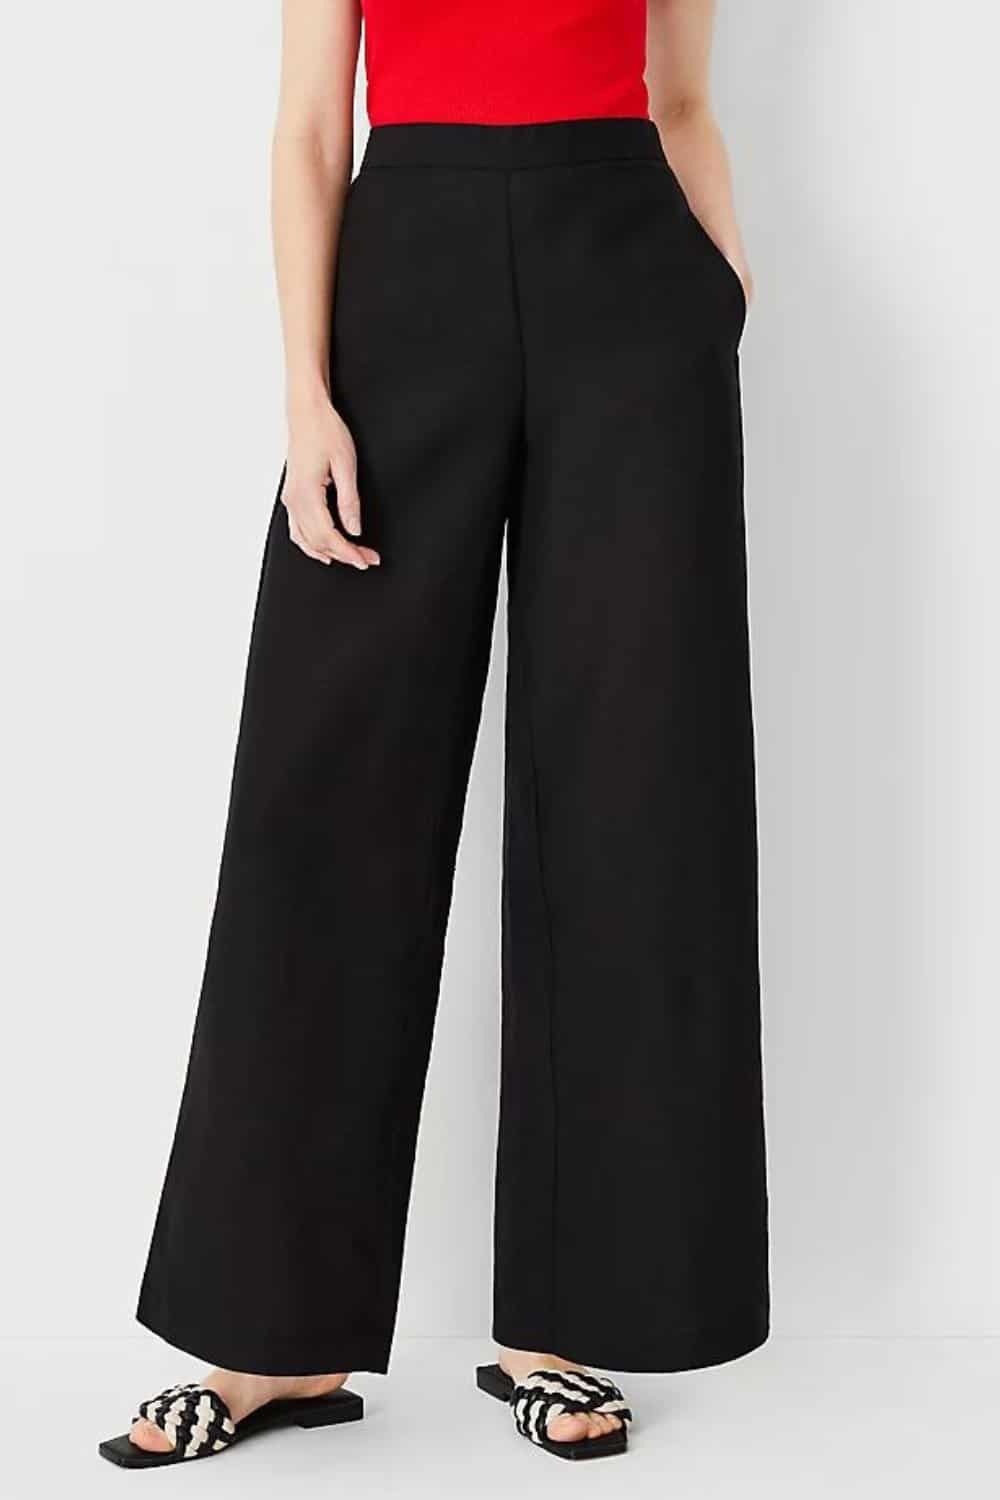 Ann Taylor Pull On Palazzo Pant